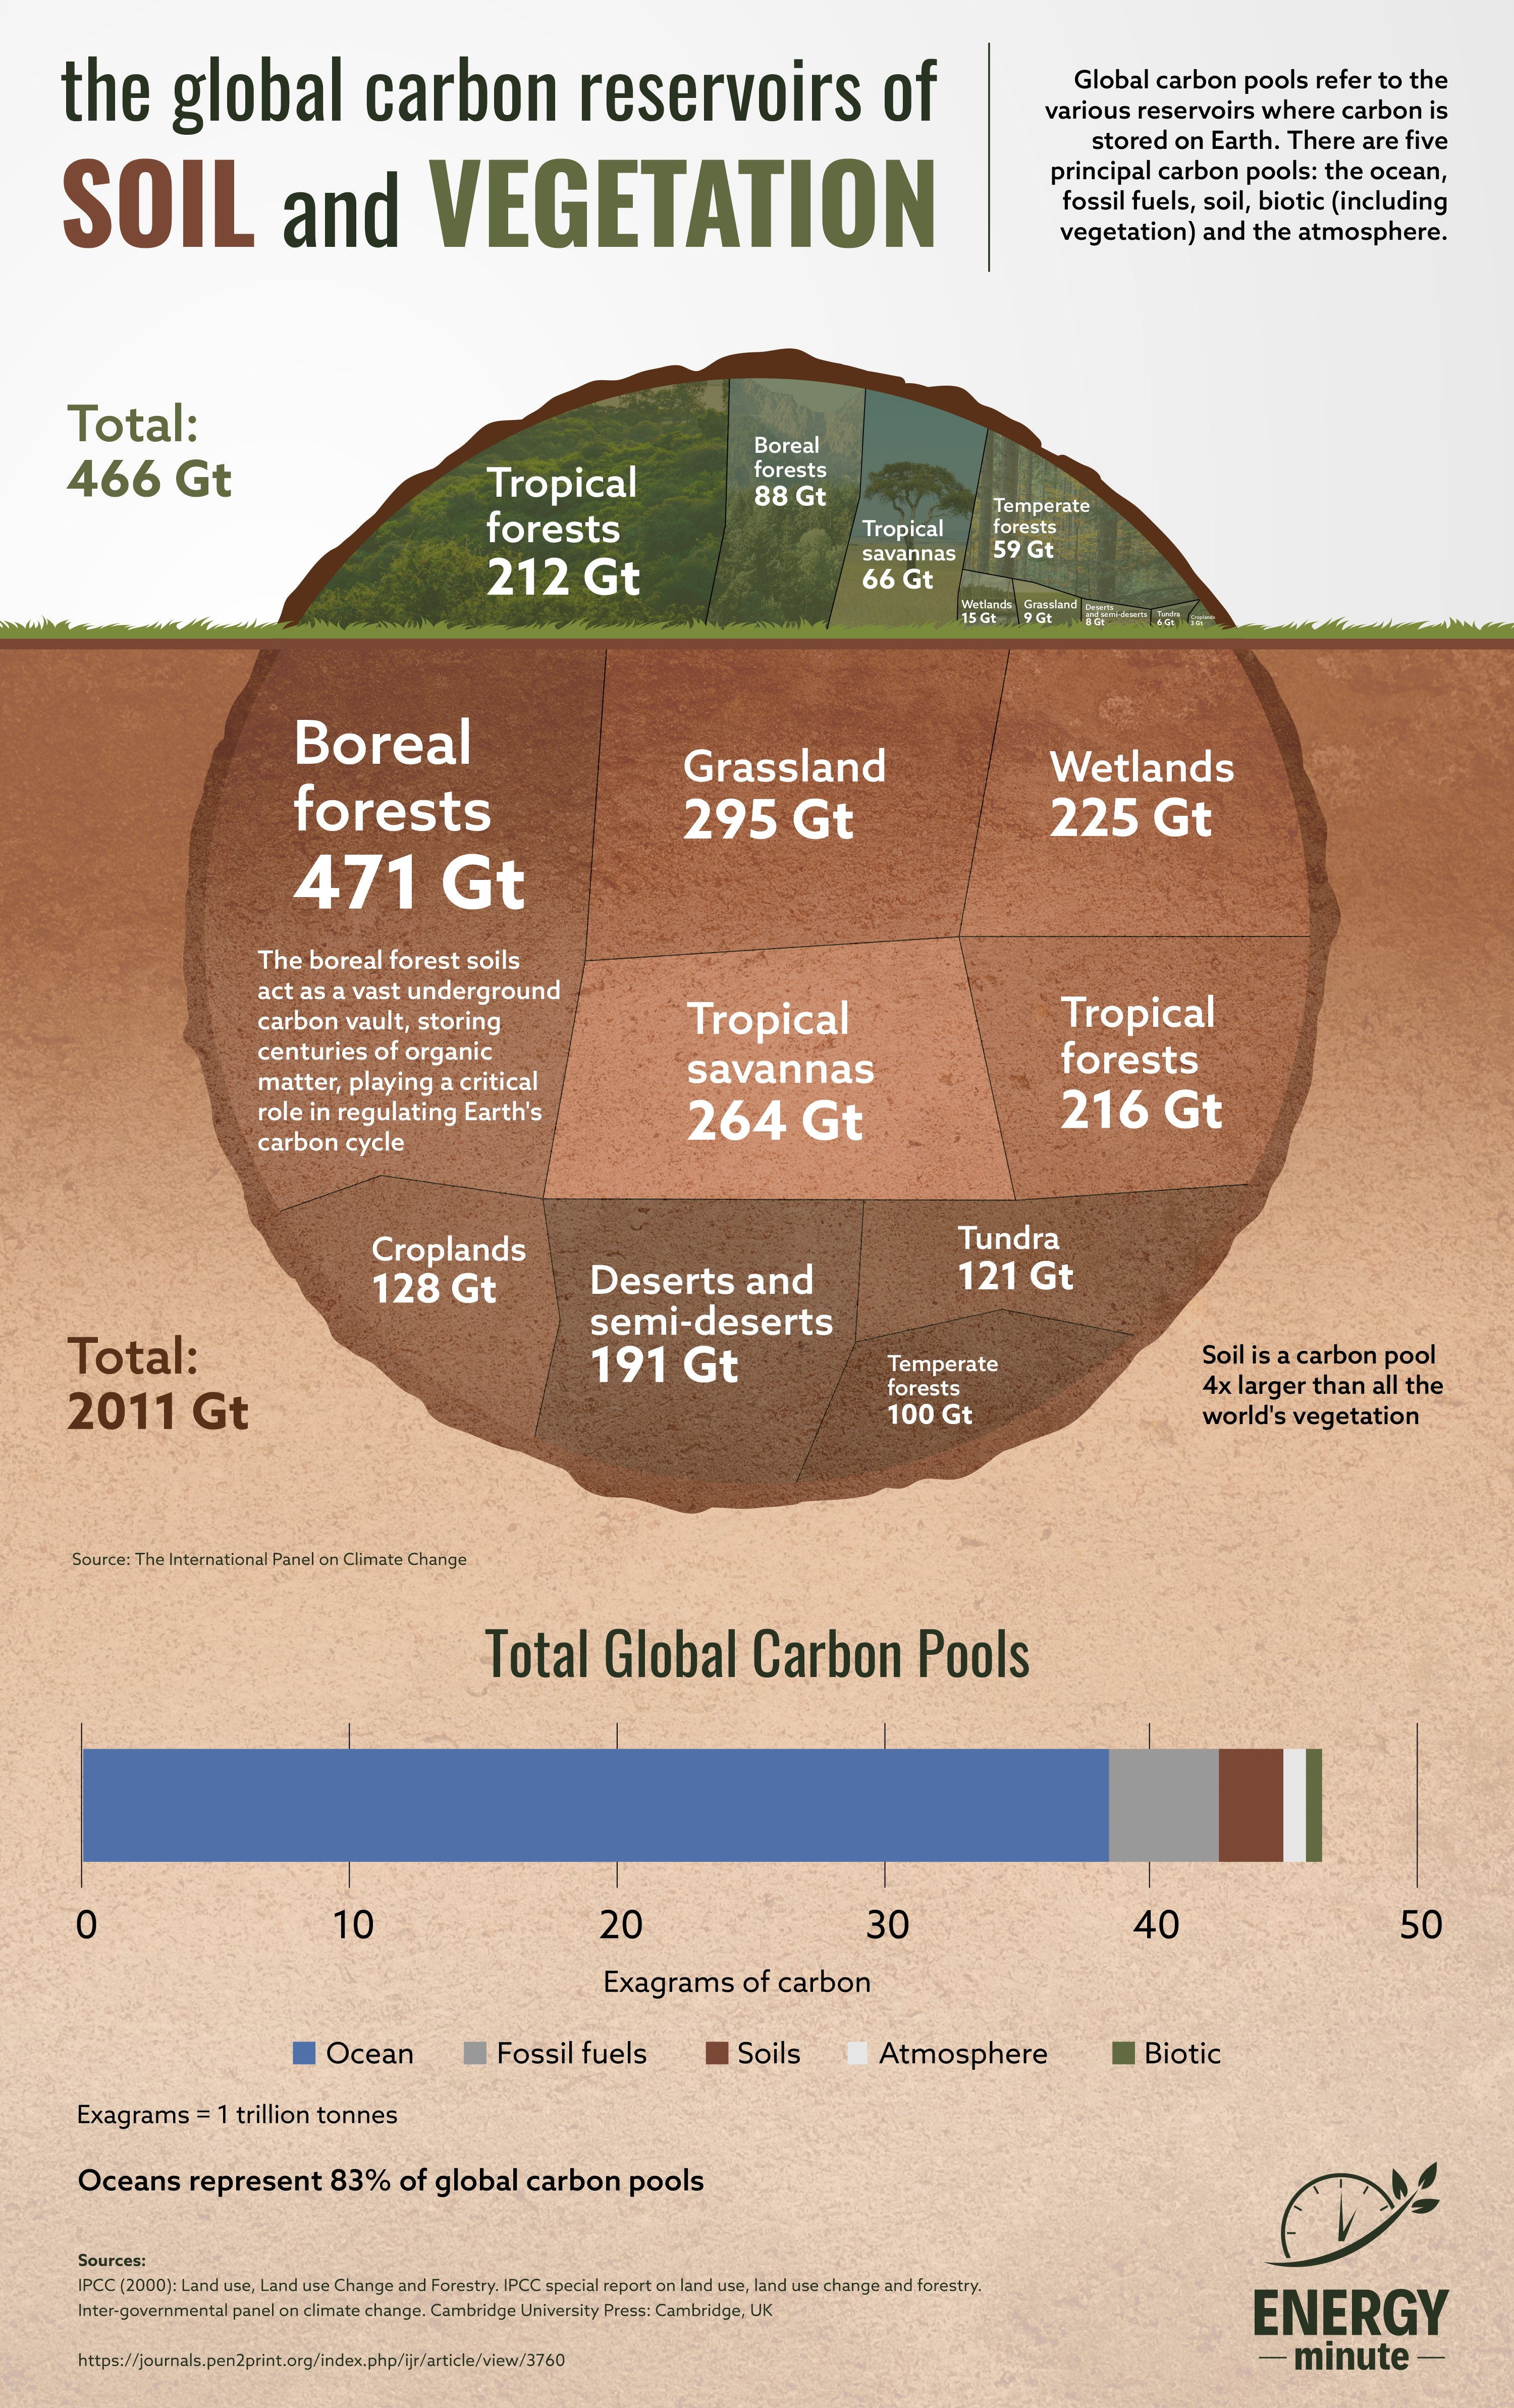 The Global Carbon Reserves of Soil and Vegetation